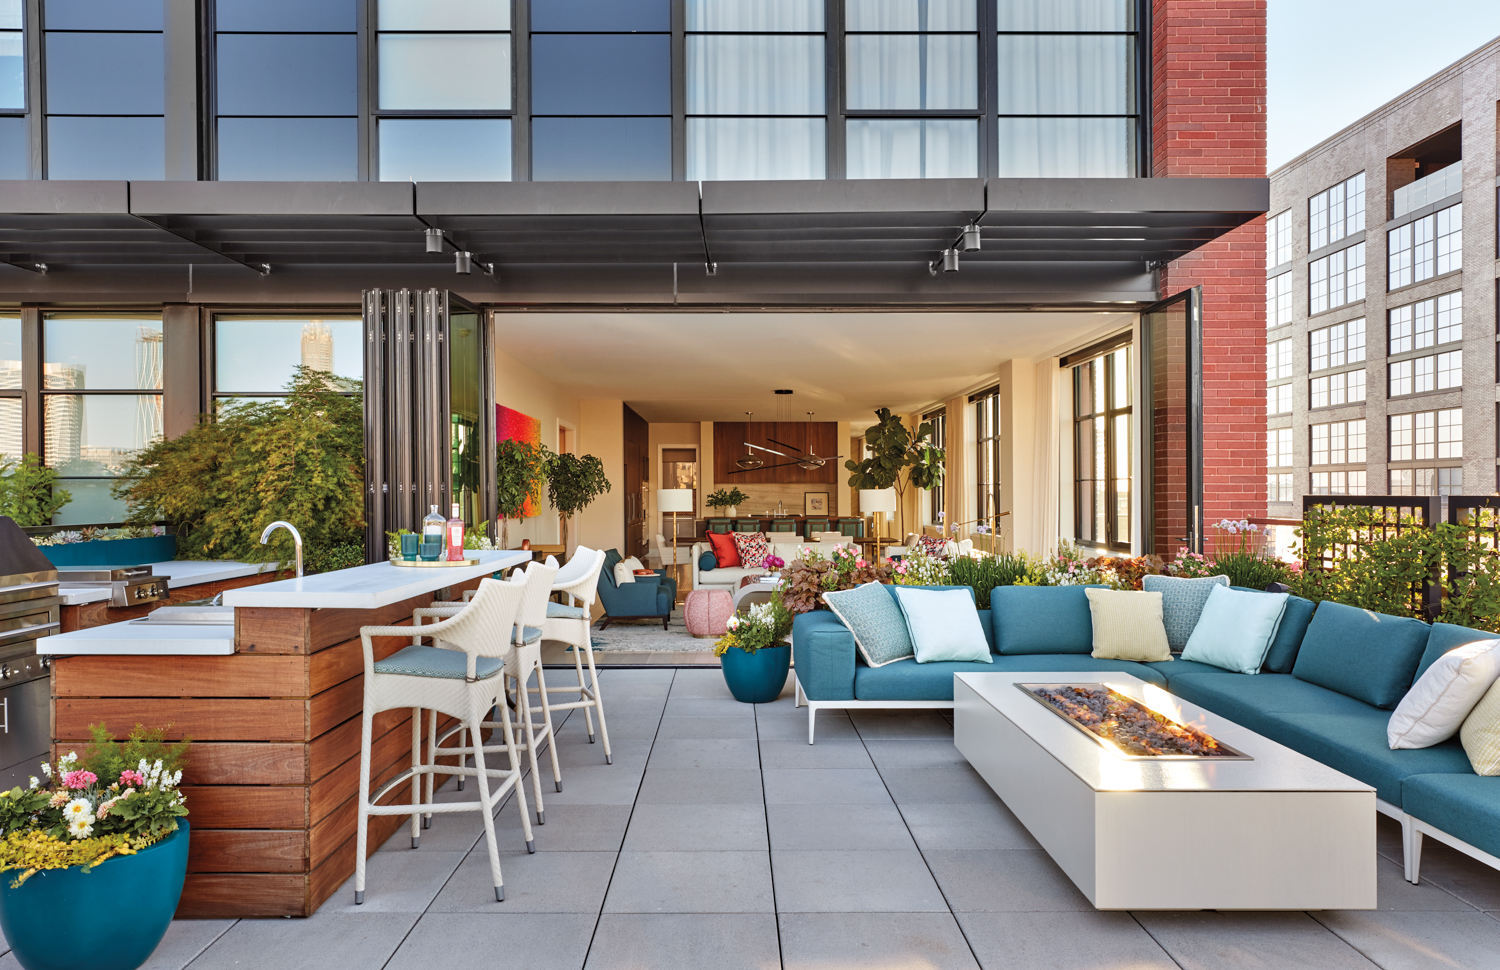 Urban patio with blue sectional, fire pit and ipe wood bar.